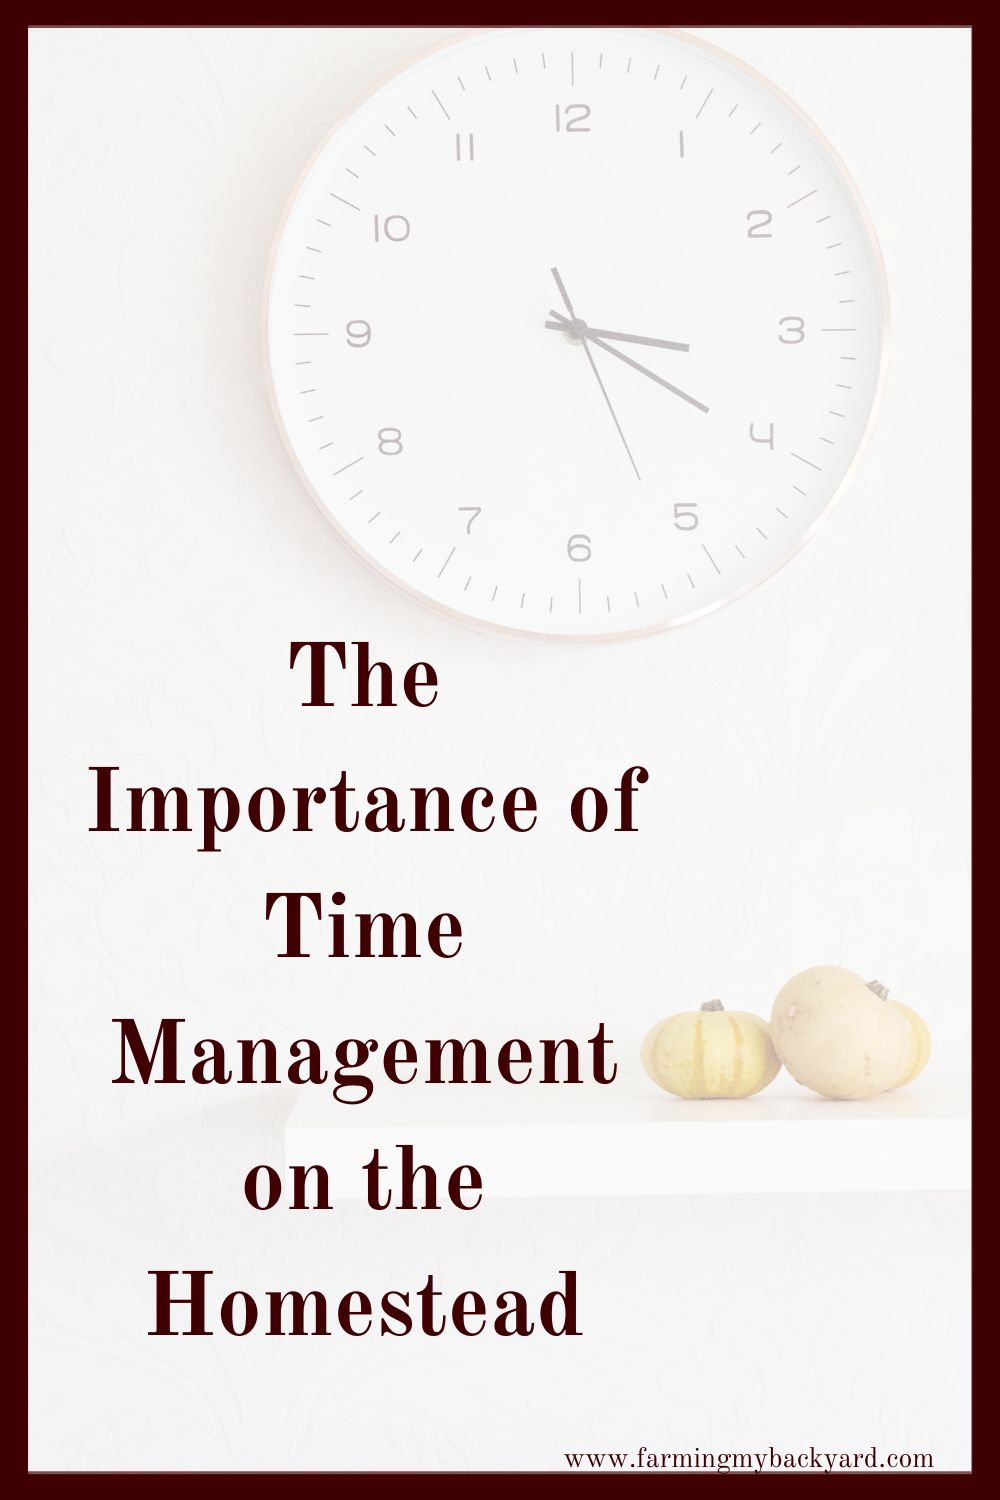 Every single one of us is limited by TIME.  The importance of time management is huge for homesteaders! How can you get it all done and still have a life?